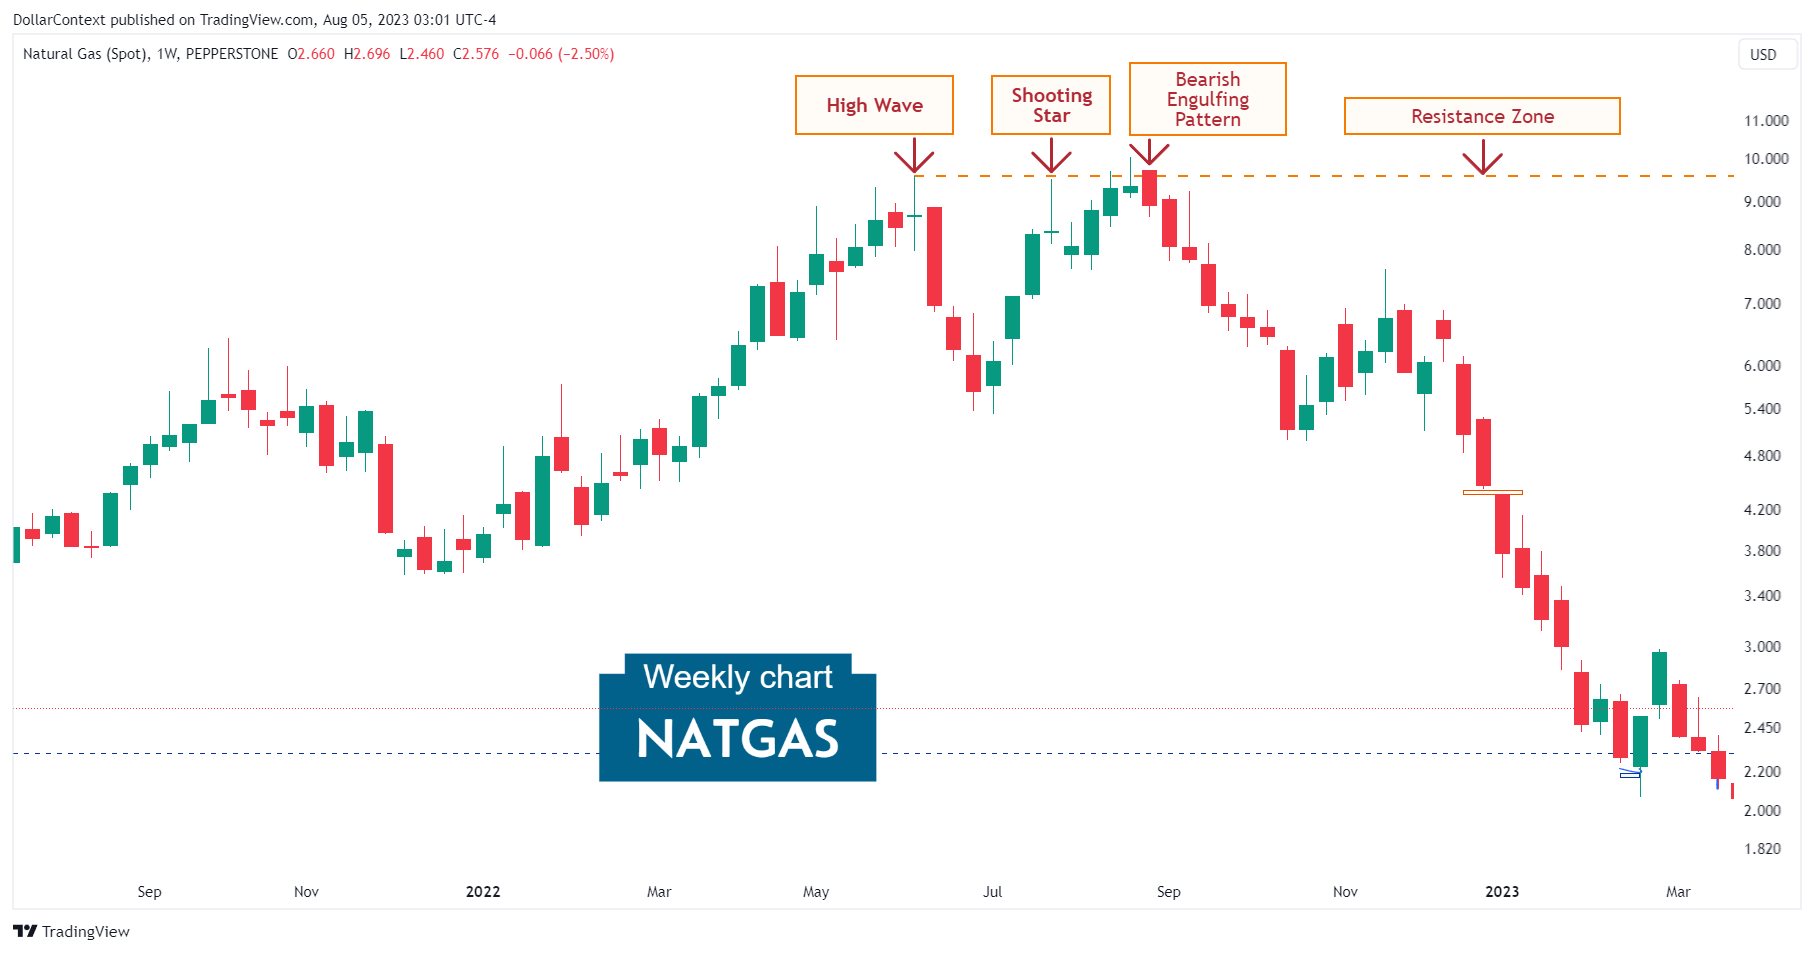 Natural Gas: Combination of Different Candlestick Patterns Near a Resistance Level. July 2022 (Weekly Chart)